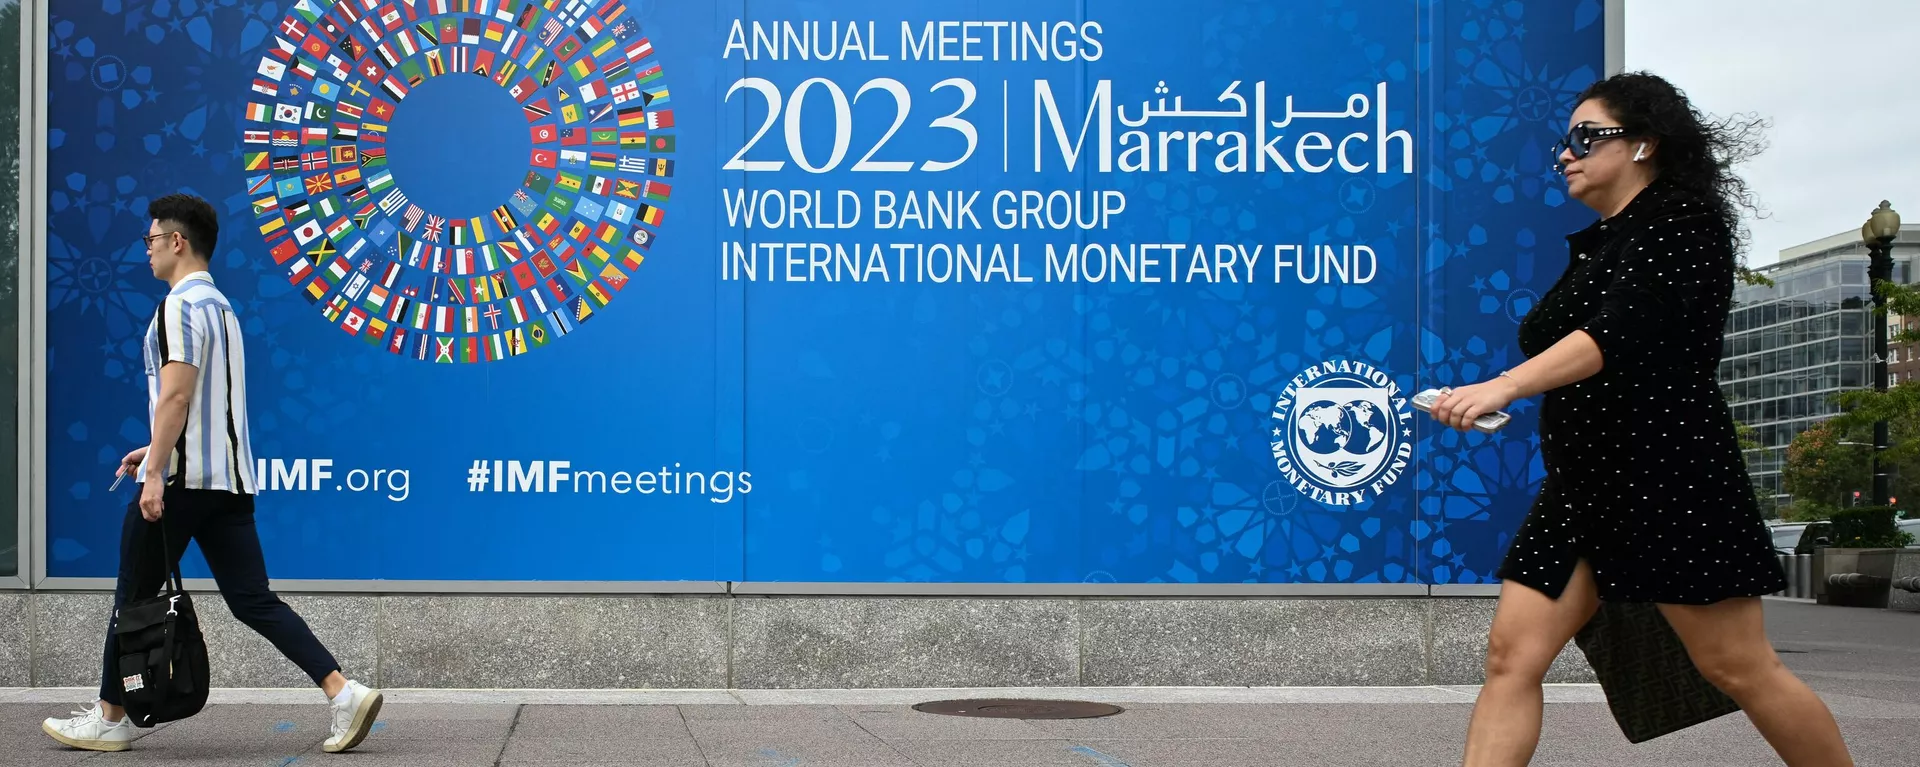 Pedestrians walk past a billboard announcing the World Bank Group and International Monetary Fund annual meetings, on the side of the International Monetary Fund headquarters in Washington DC on October 5, 2023.  - Sputnik Africa, 1920, 16.10.2023